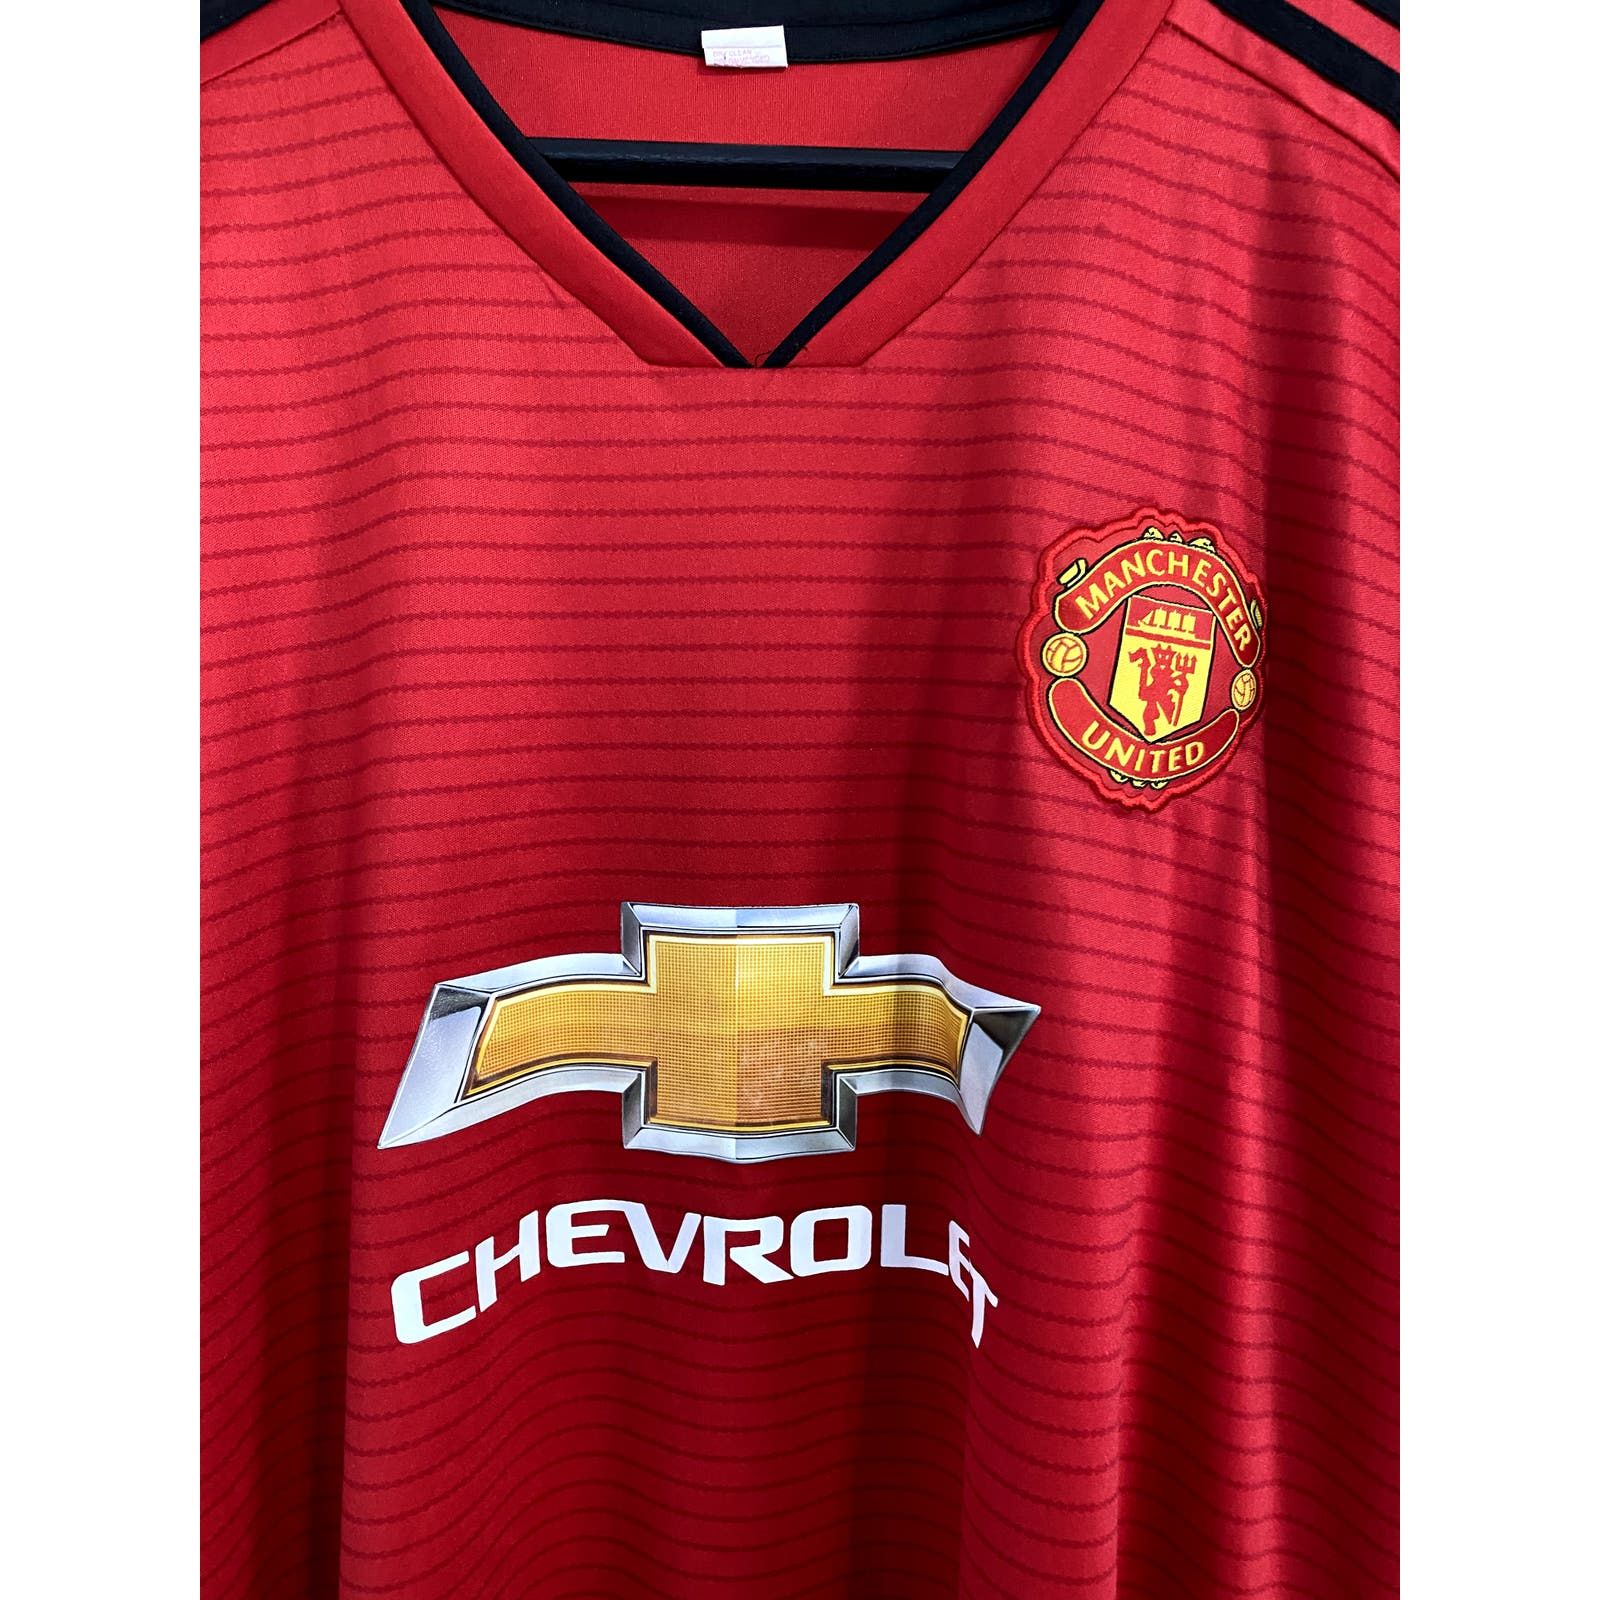 Manchester United Manchester United FC Soccer Jersey Size XL Size US XL / EU 56 / 4 - 2 Preview